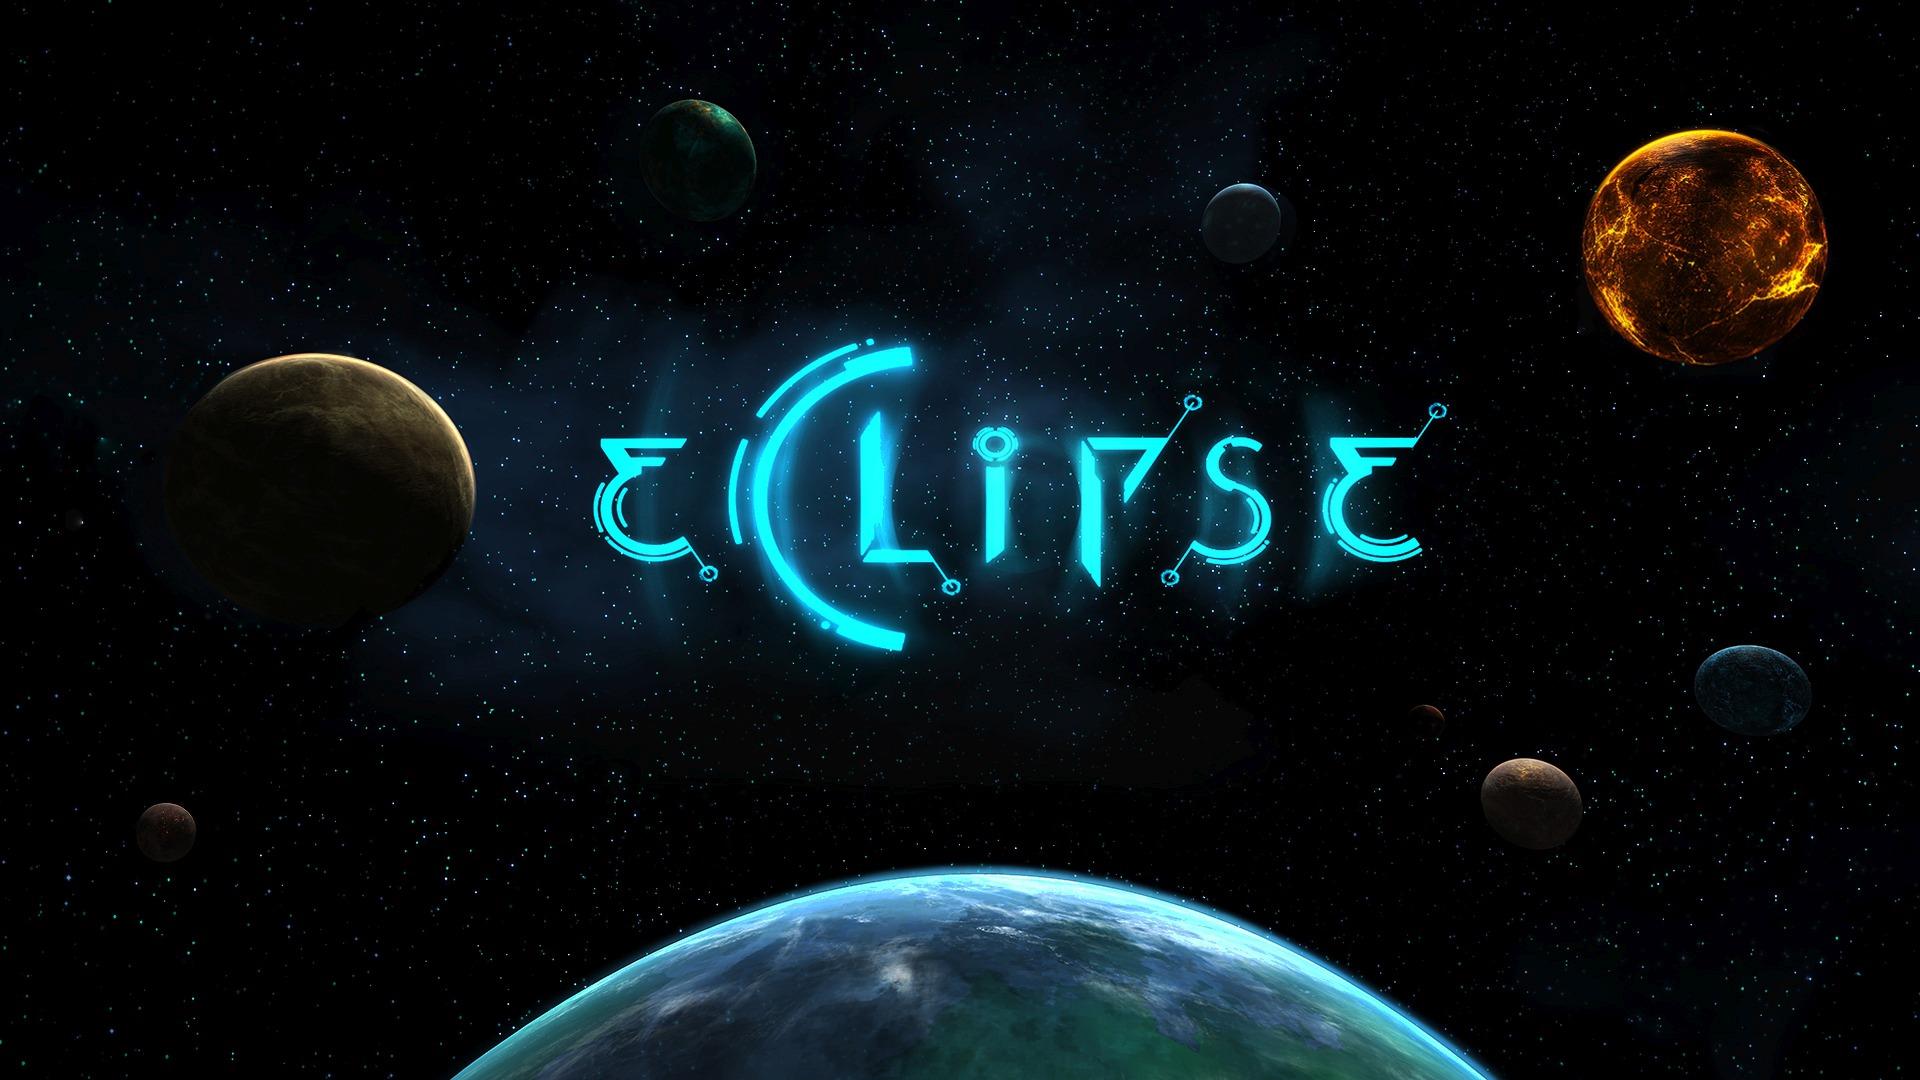 Eclipse Is A Beautiful Sci Fi Exploration Game, Now Coming